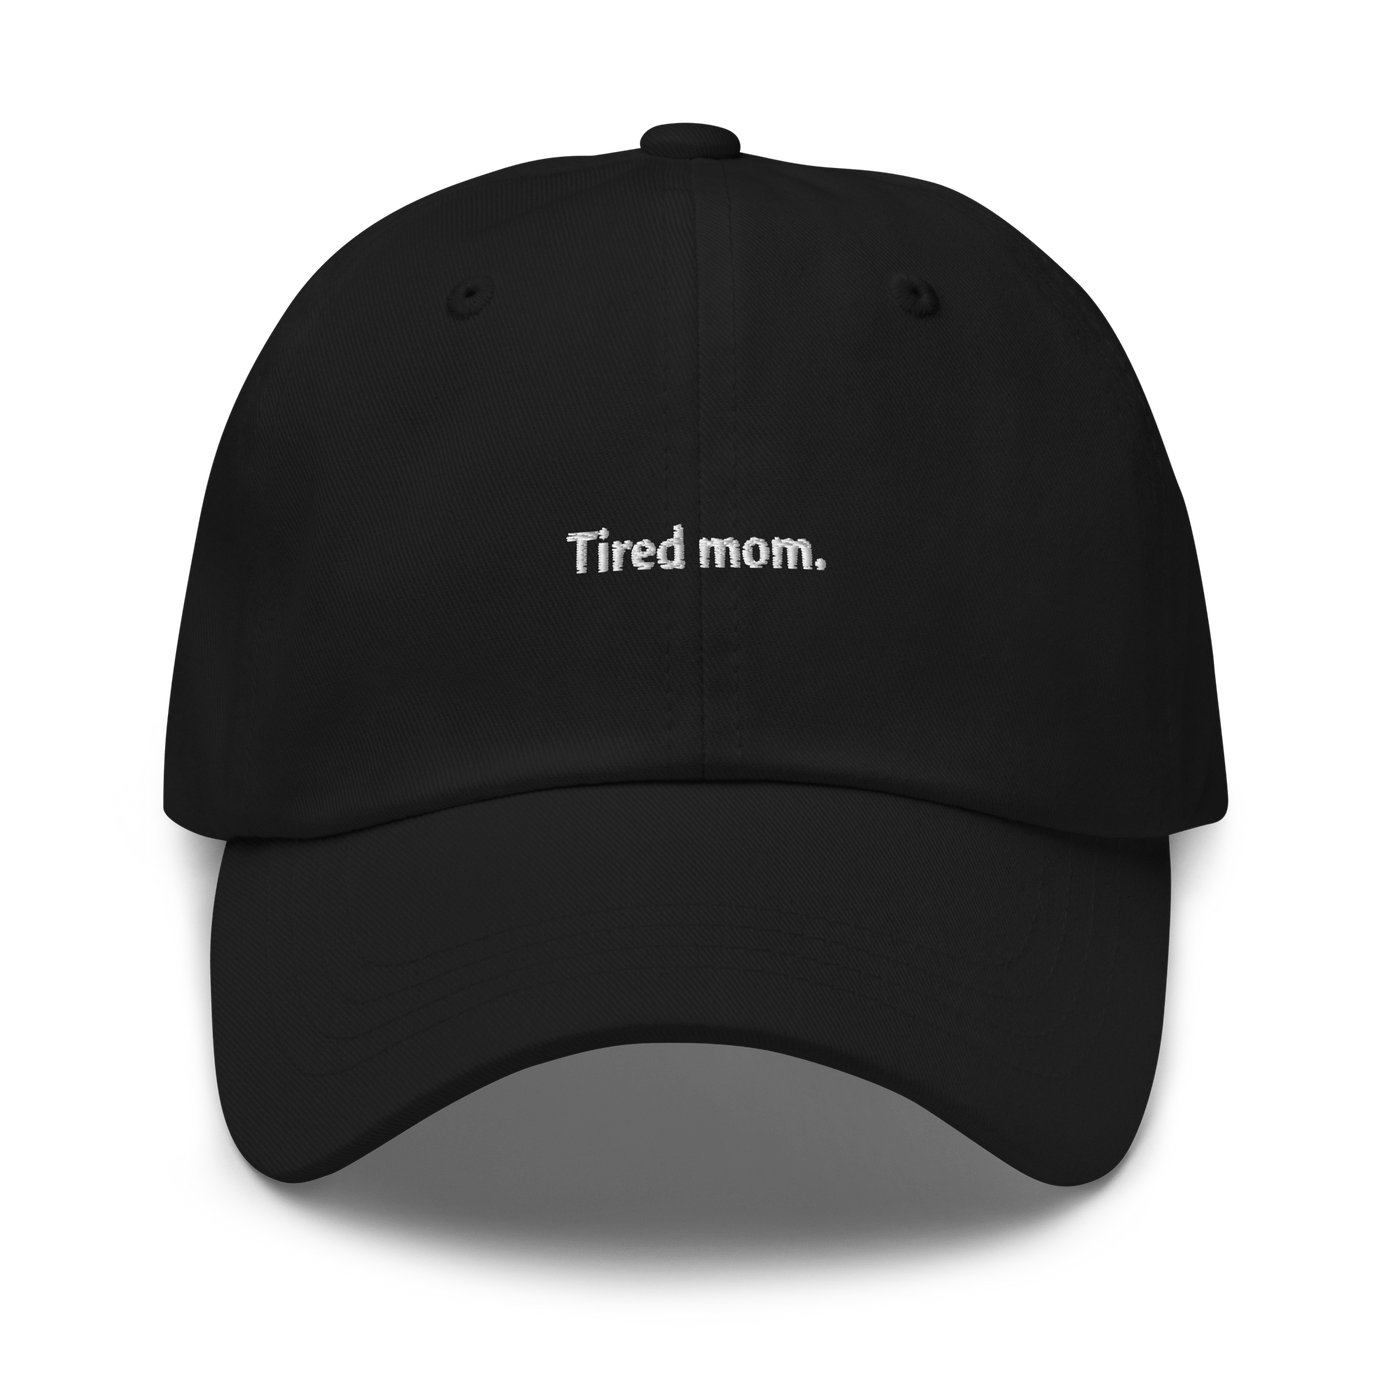 Tired mom Dad hat - Black - - Just Another Cap Store